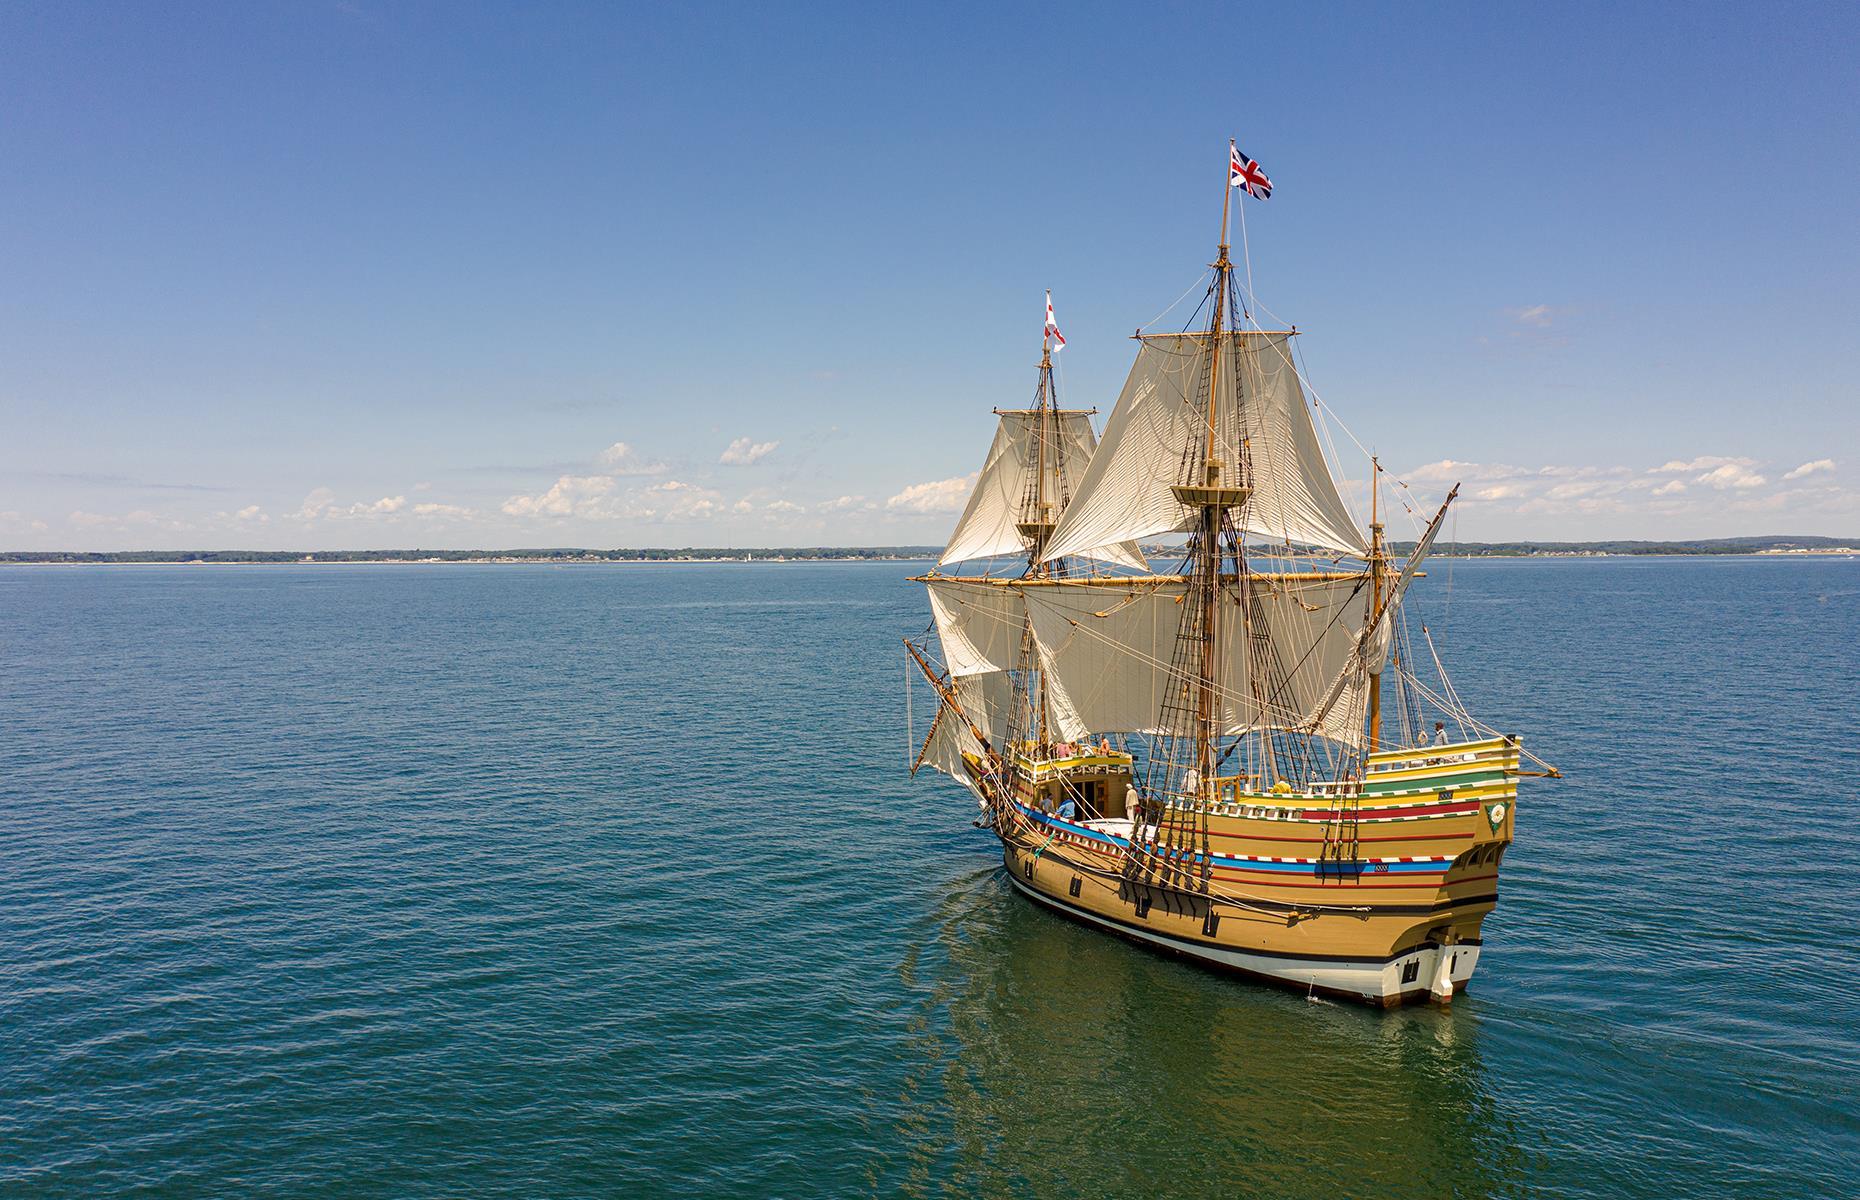 <p>It’s been over 400 years since the Pilgrims sailed the seas on the iconic Mayflower ship and established the first permanent European colony in what would become Plymouth, Massachusetts. But how much do you know about their story, the mighty ship they voyaged on, and the Native people who helped them create their settlement?</p>  <p><strong>Read on as we chart the history of a voyage that would shape the course of American history forever....</strong></p>